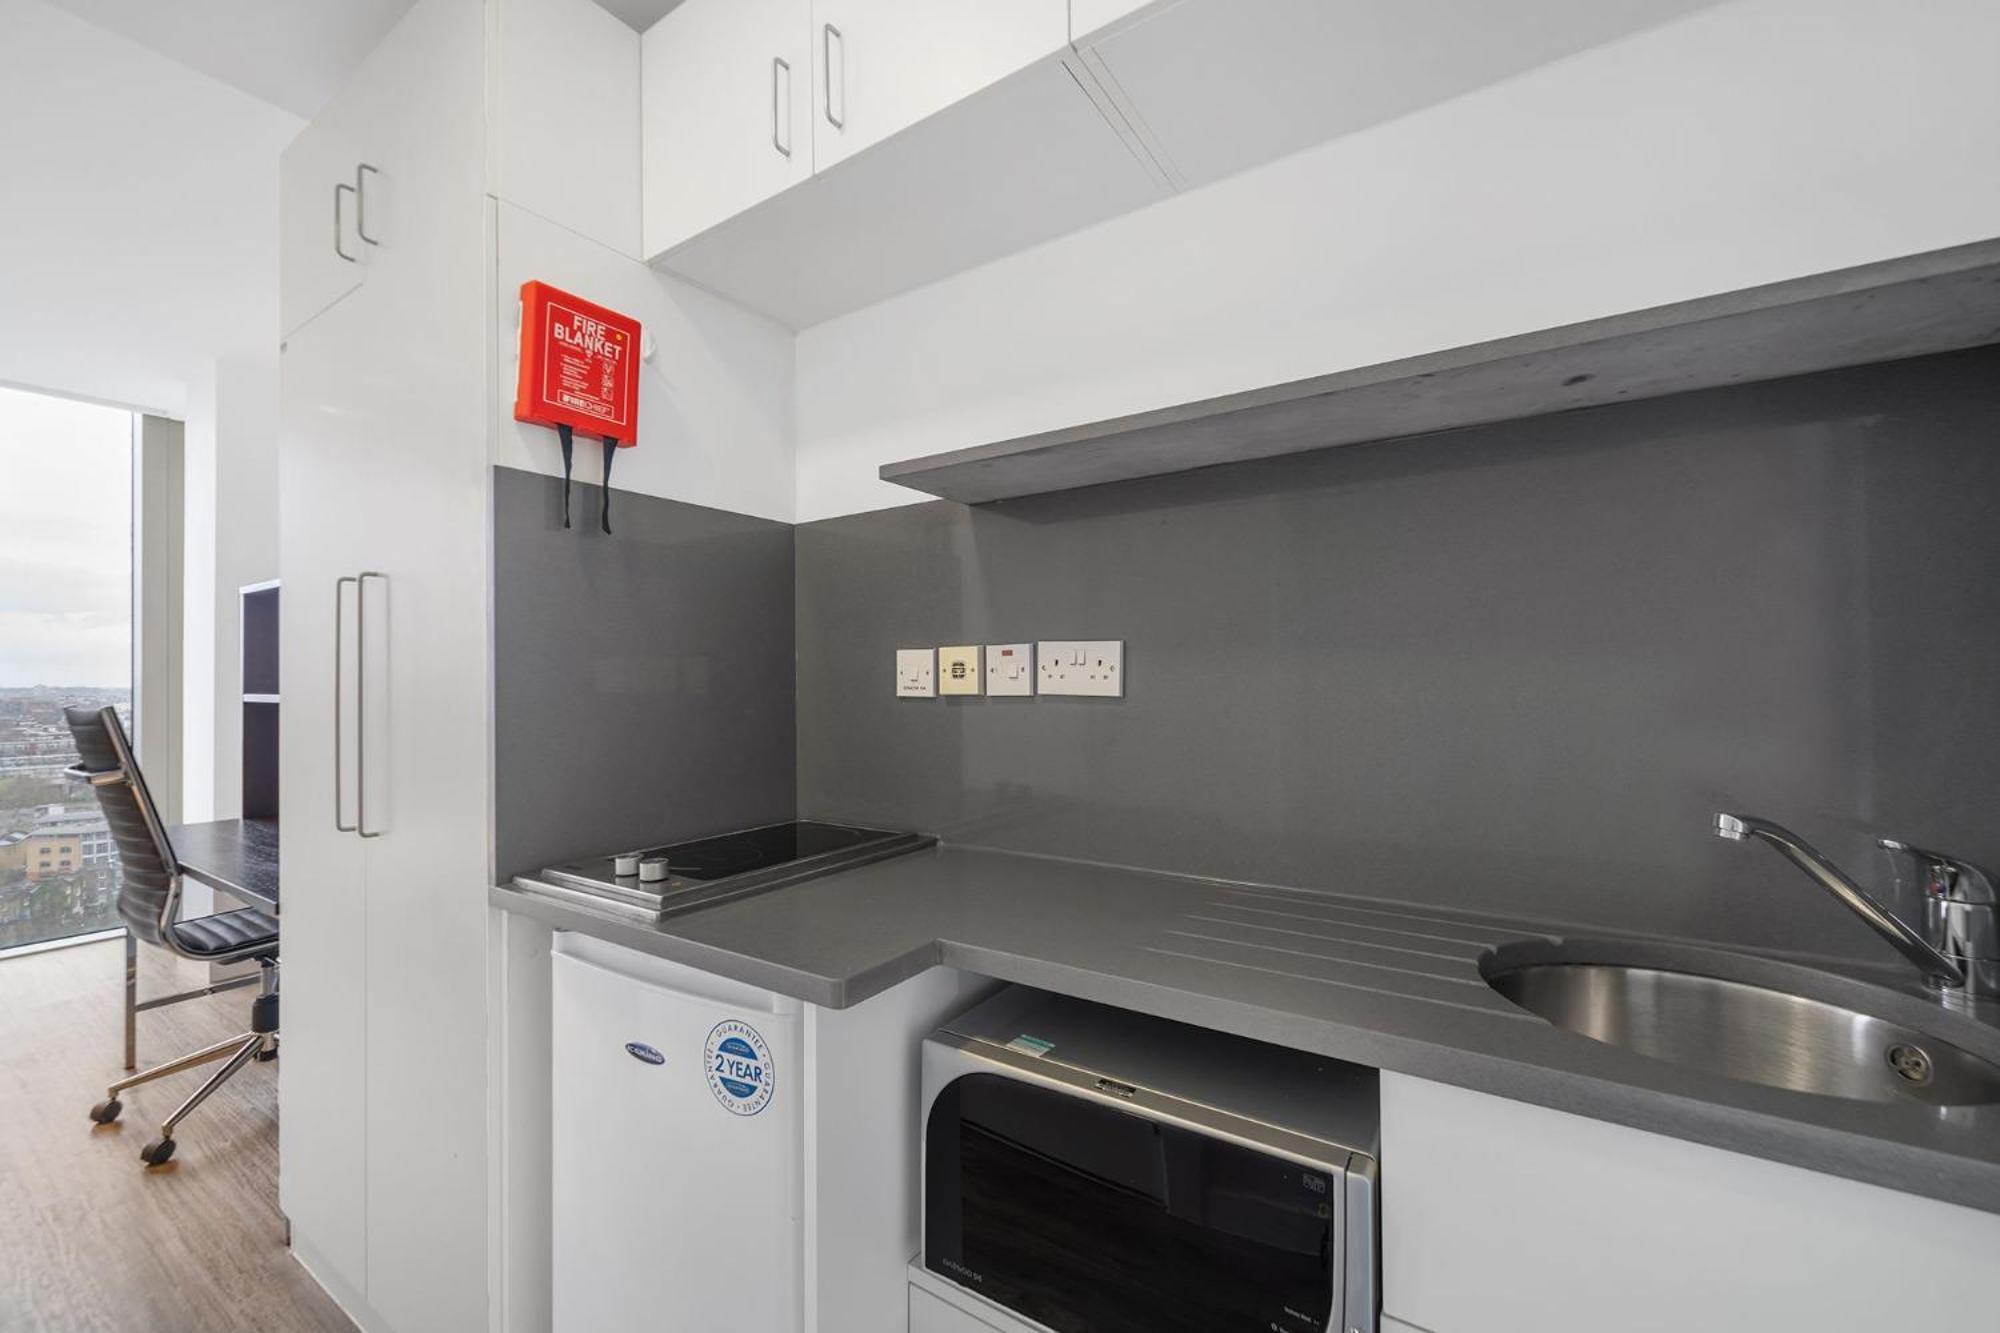 Studios, Apartments And Private Bedrooms With Shared Kitchen At Chapter Kings Cross In 伦敦 外观 照片